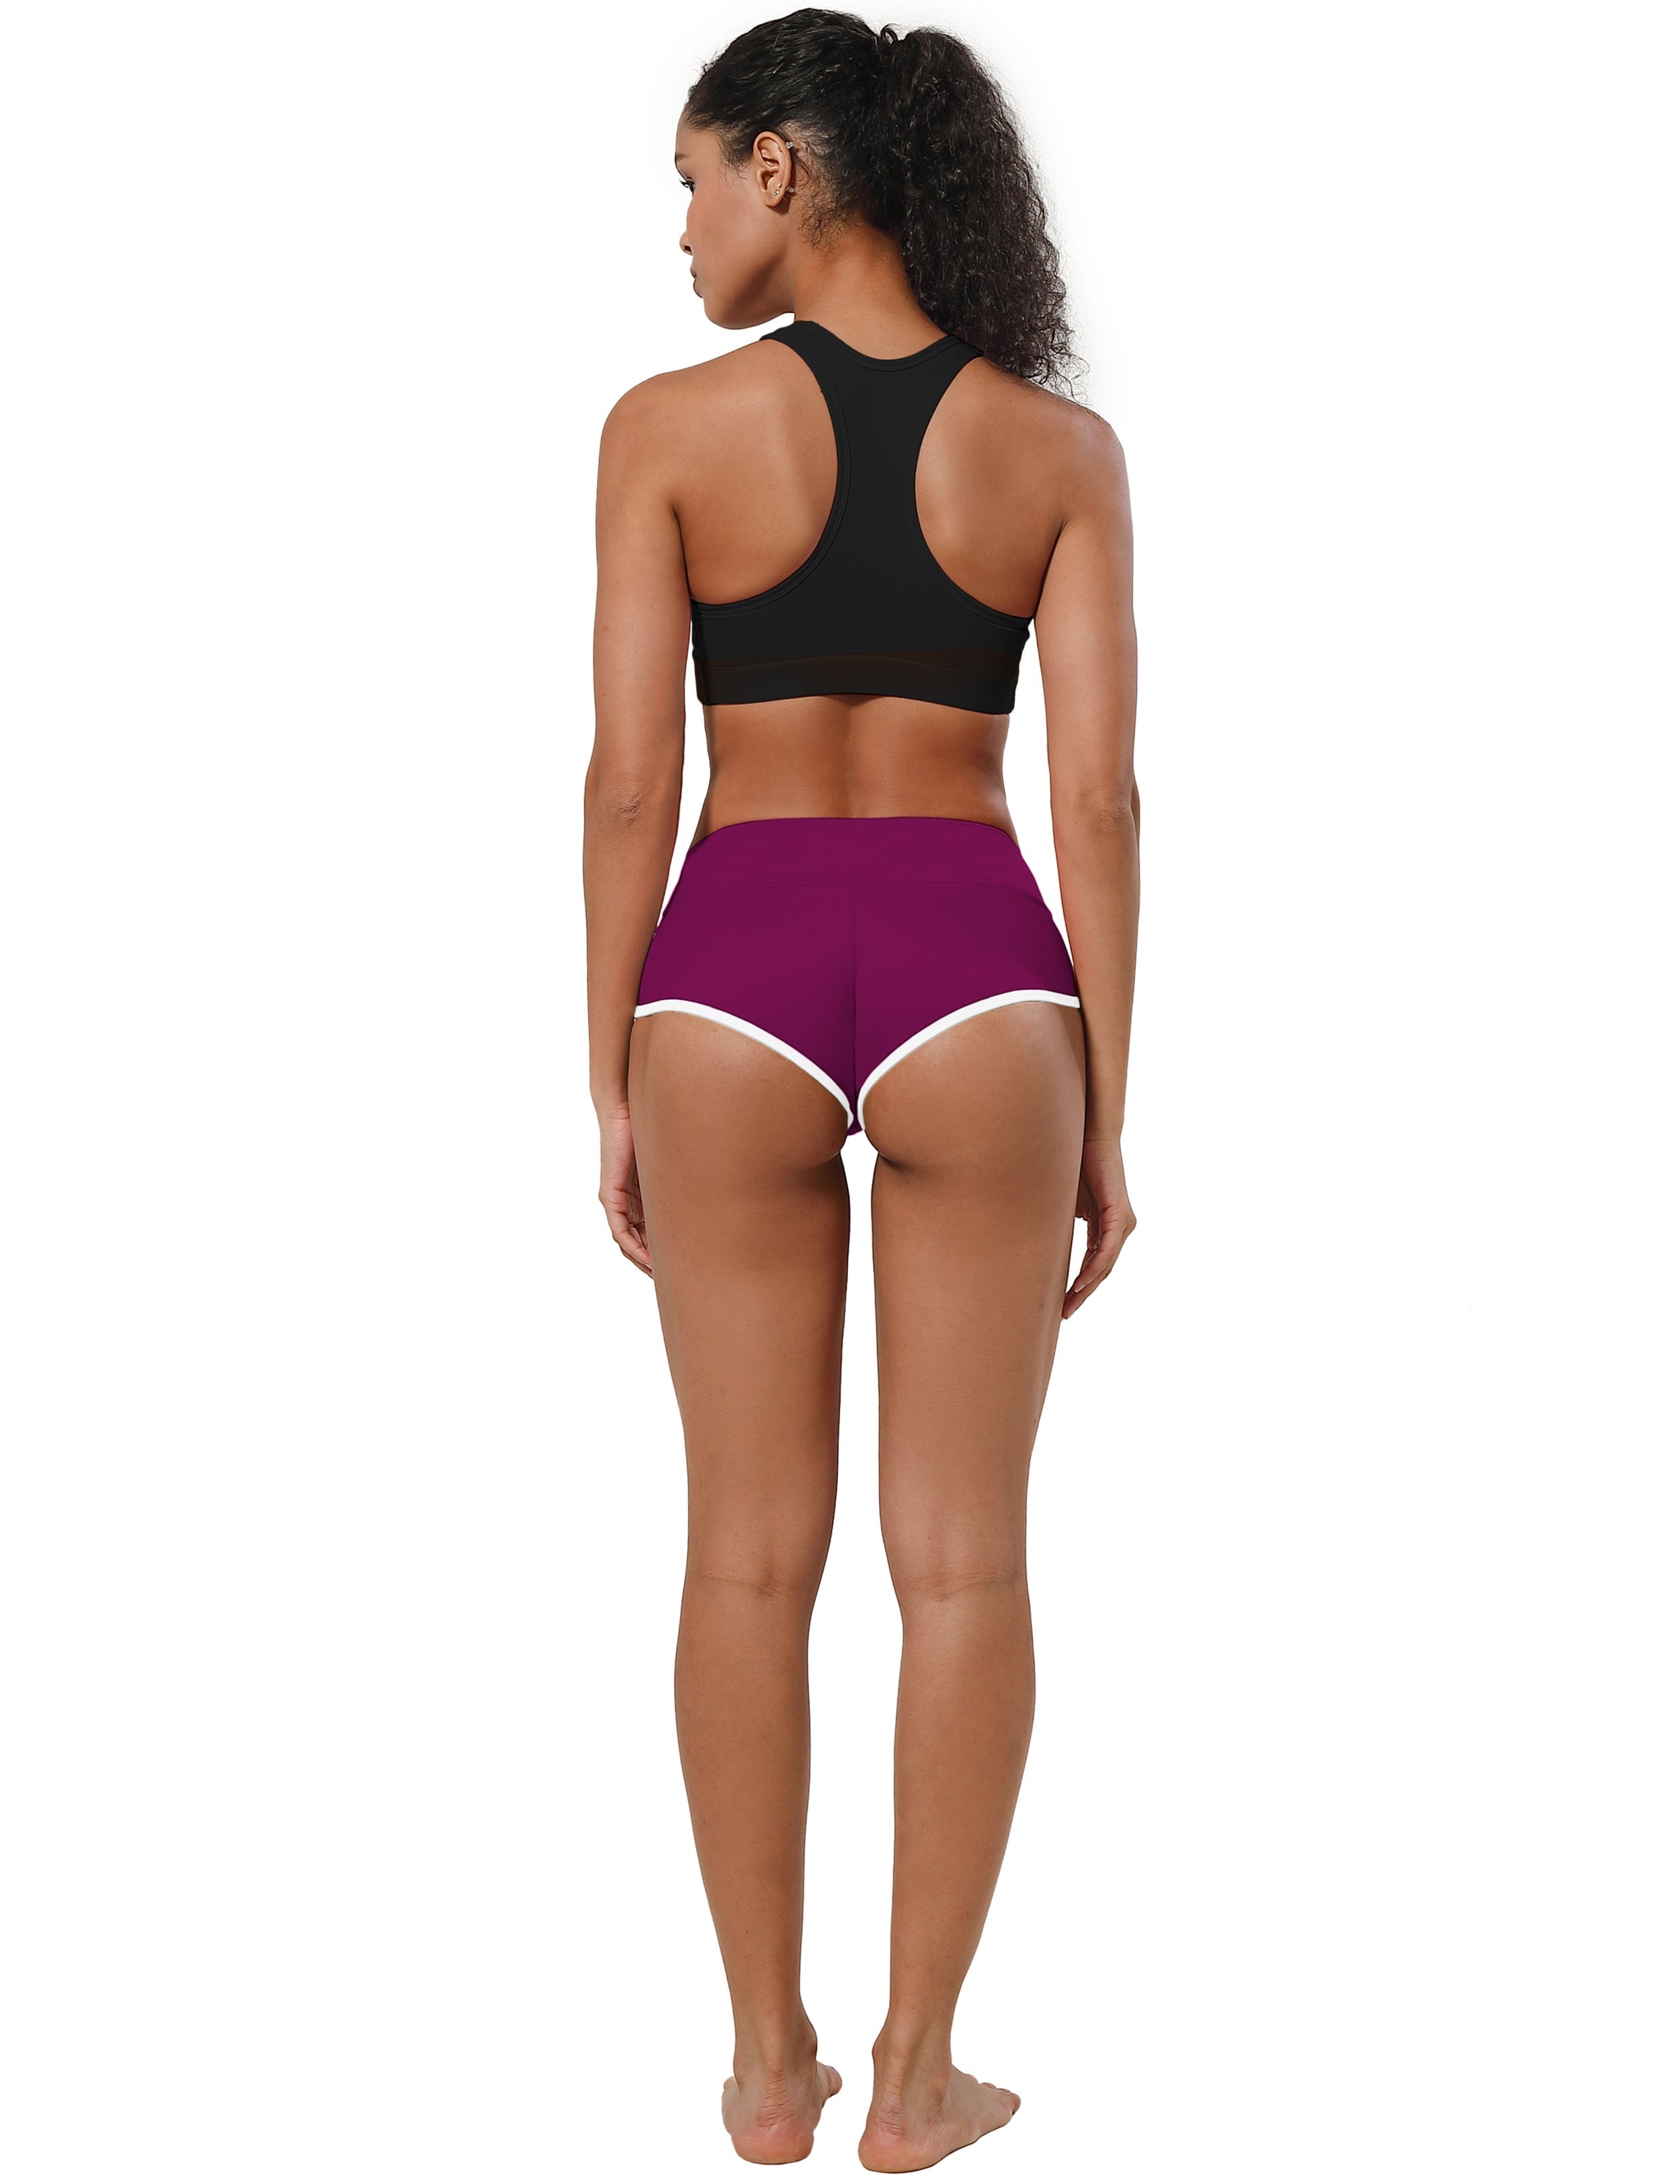 Sexy Booty Jogging Shorts grapevine Sleek, soft, smooth and totally comfortable: our newest sexy style is here. Softest-ever fabric High elasticity High density 4-way stretch Fabric doesn't attract lint easily No see-through Moisture-wicking Machine wash 75%Nylon/25%Spandex